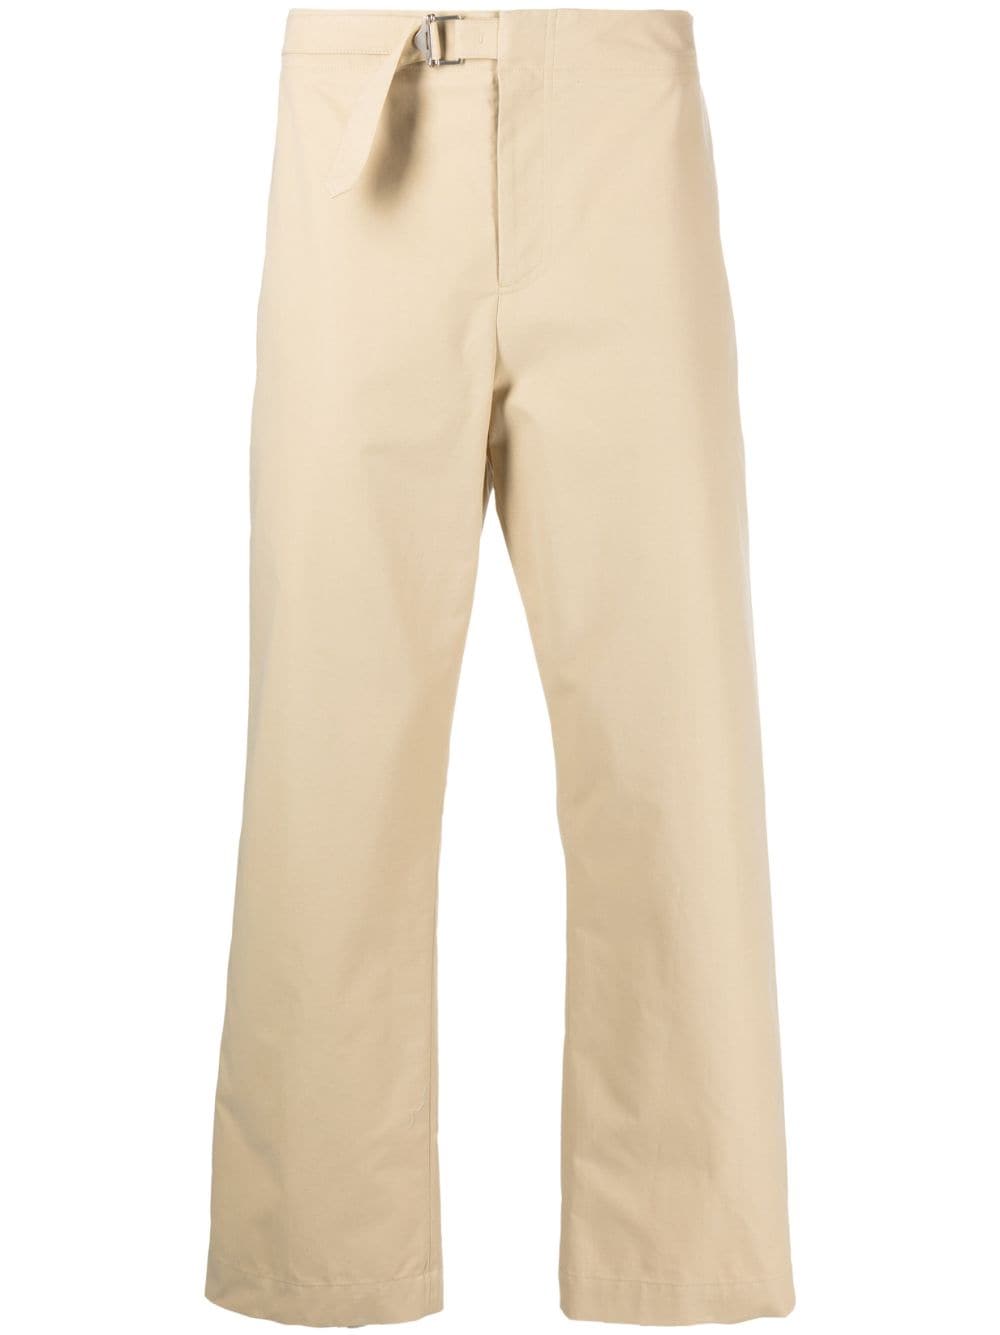 Le 17 Septembre belted-waistband cotton trousers